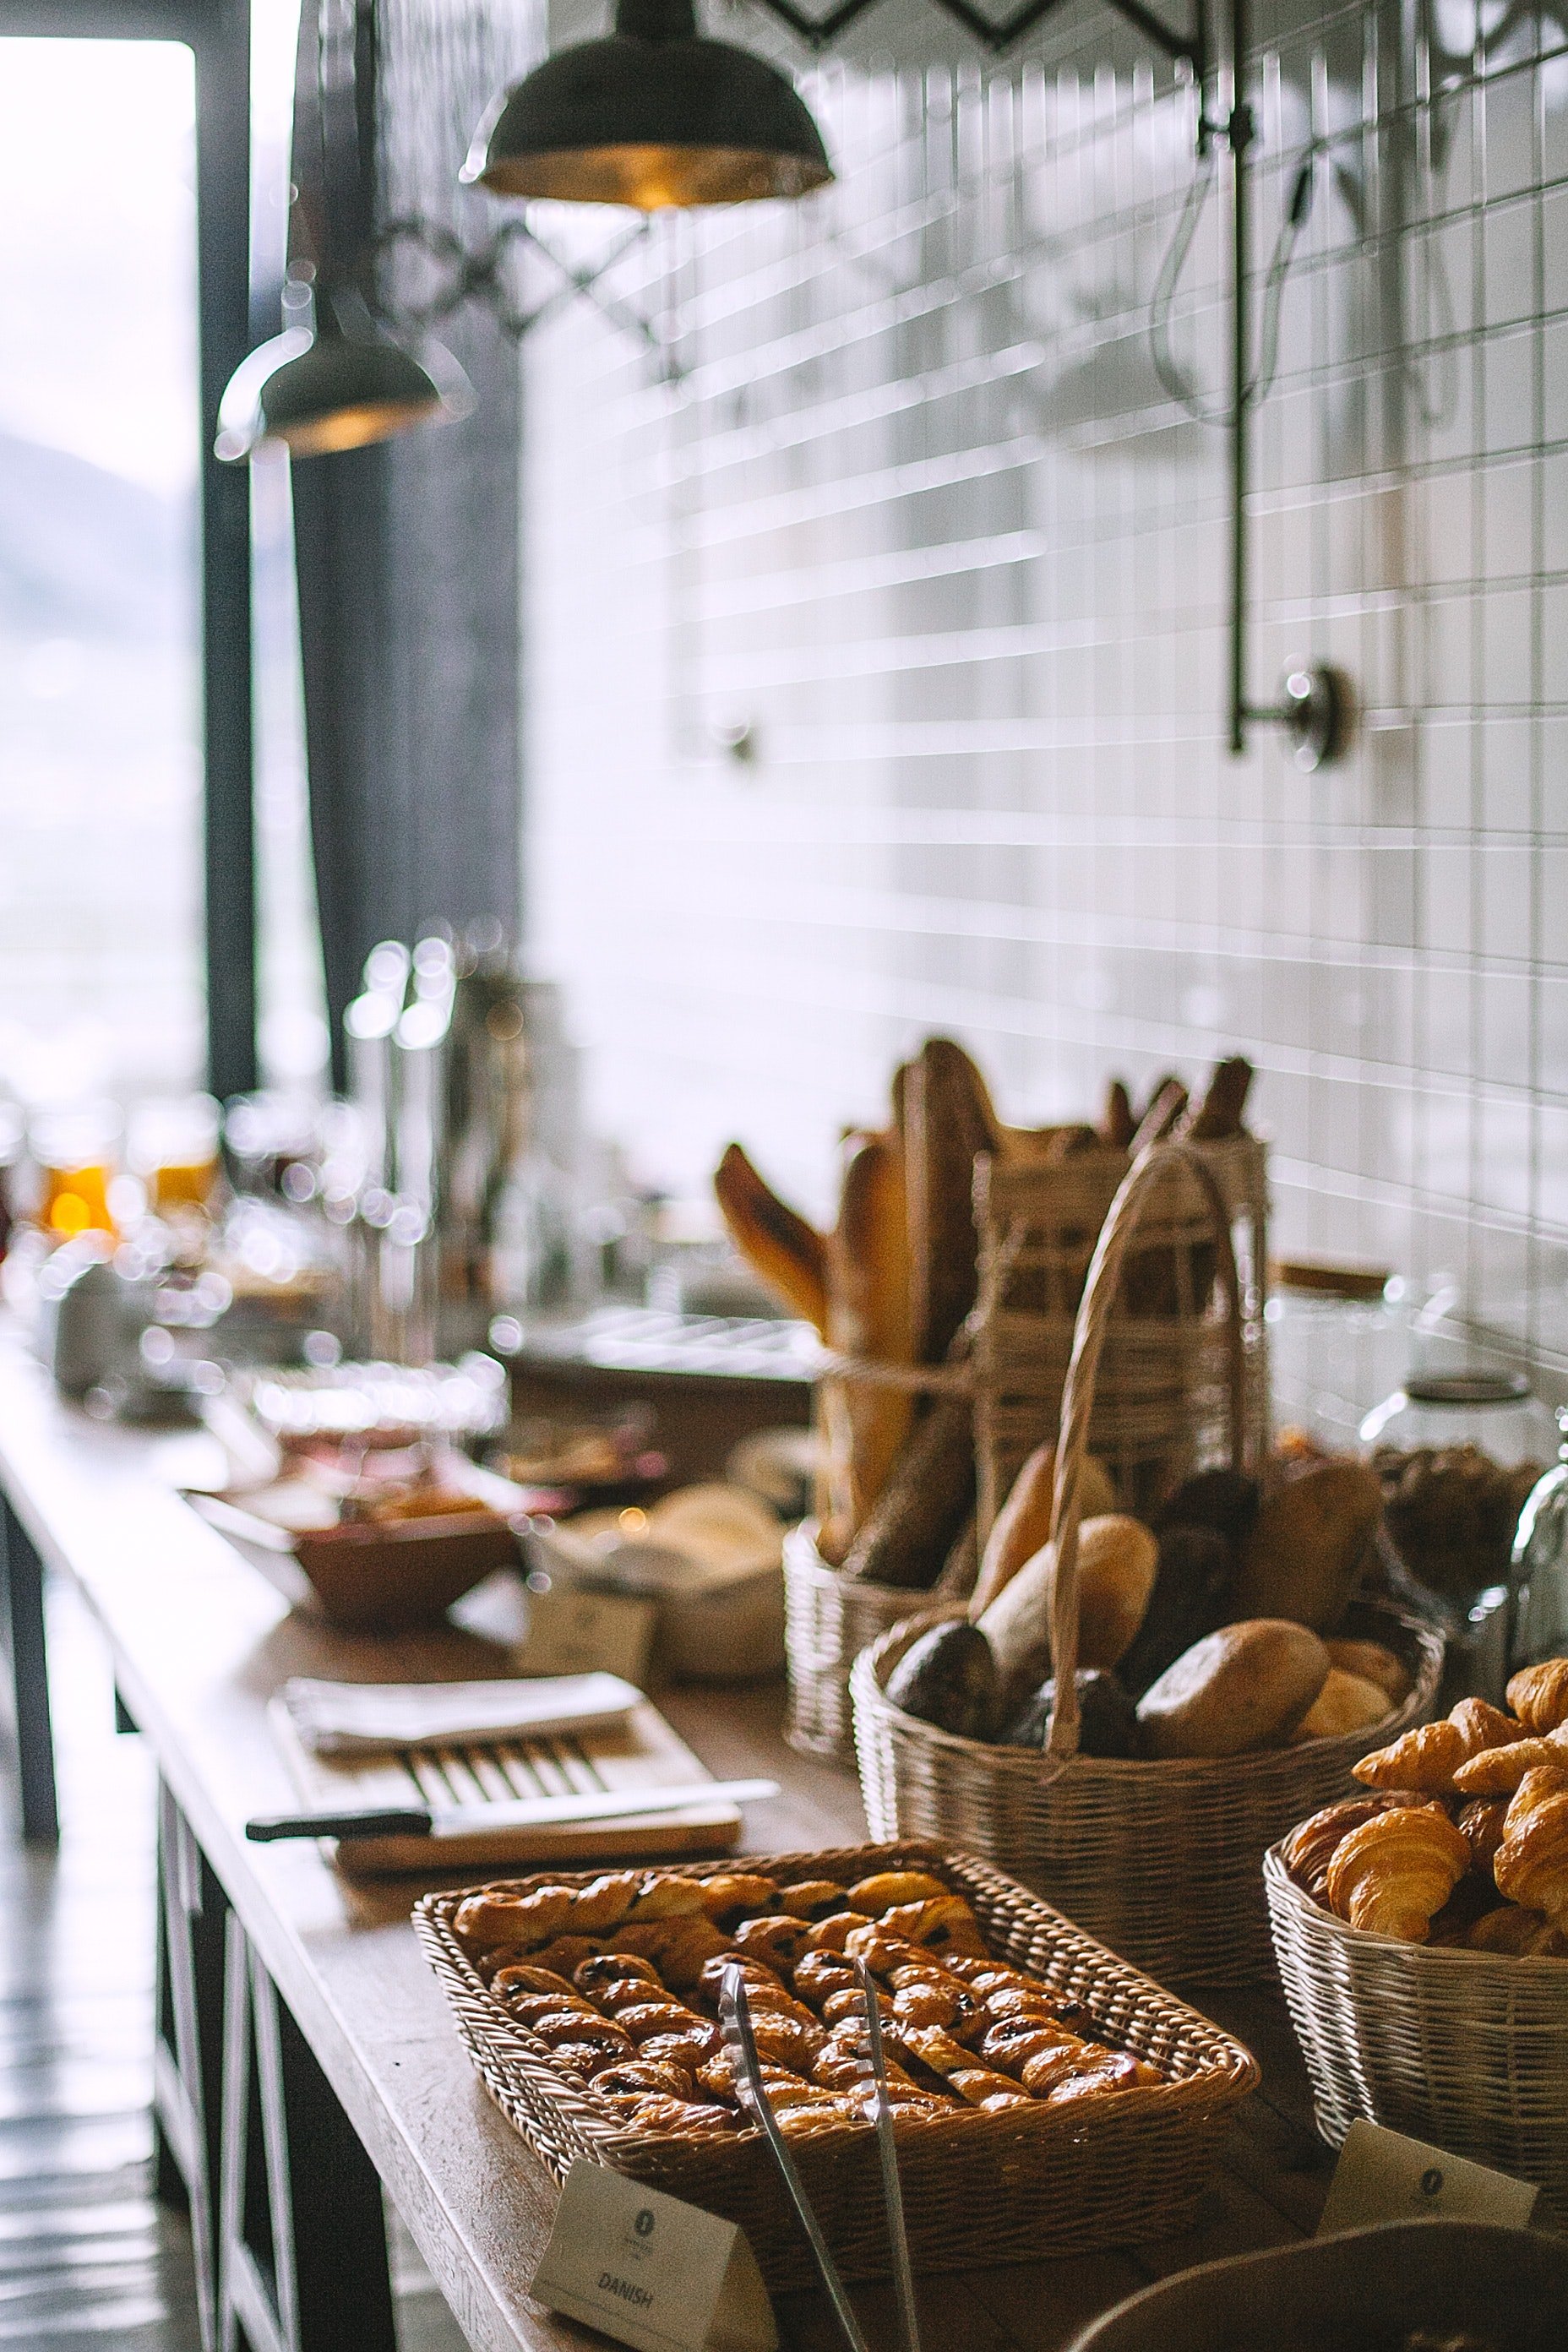 Tina's mission was complete. She finally made it to the bakery! | Source: Pexels